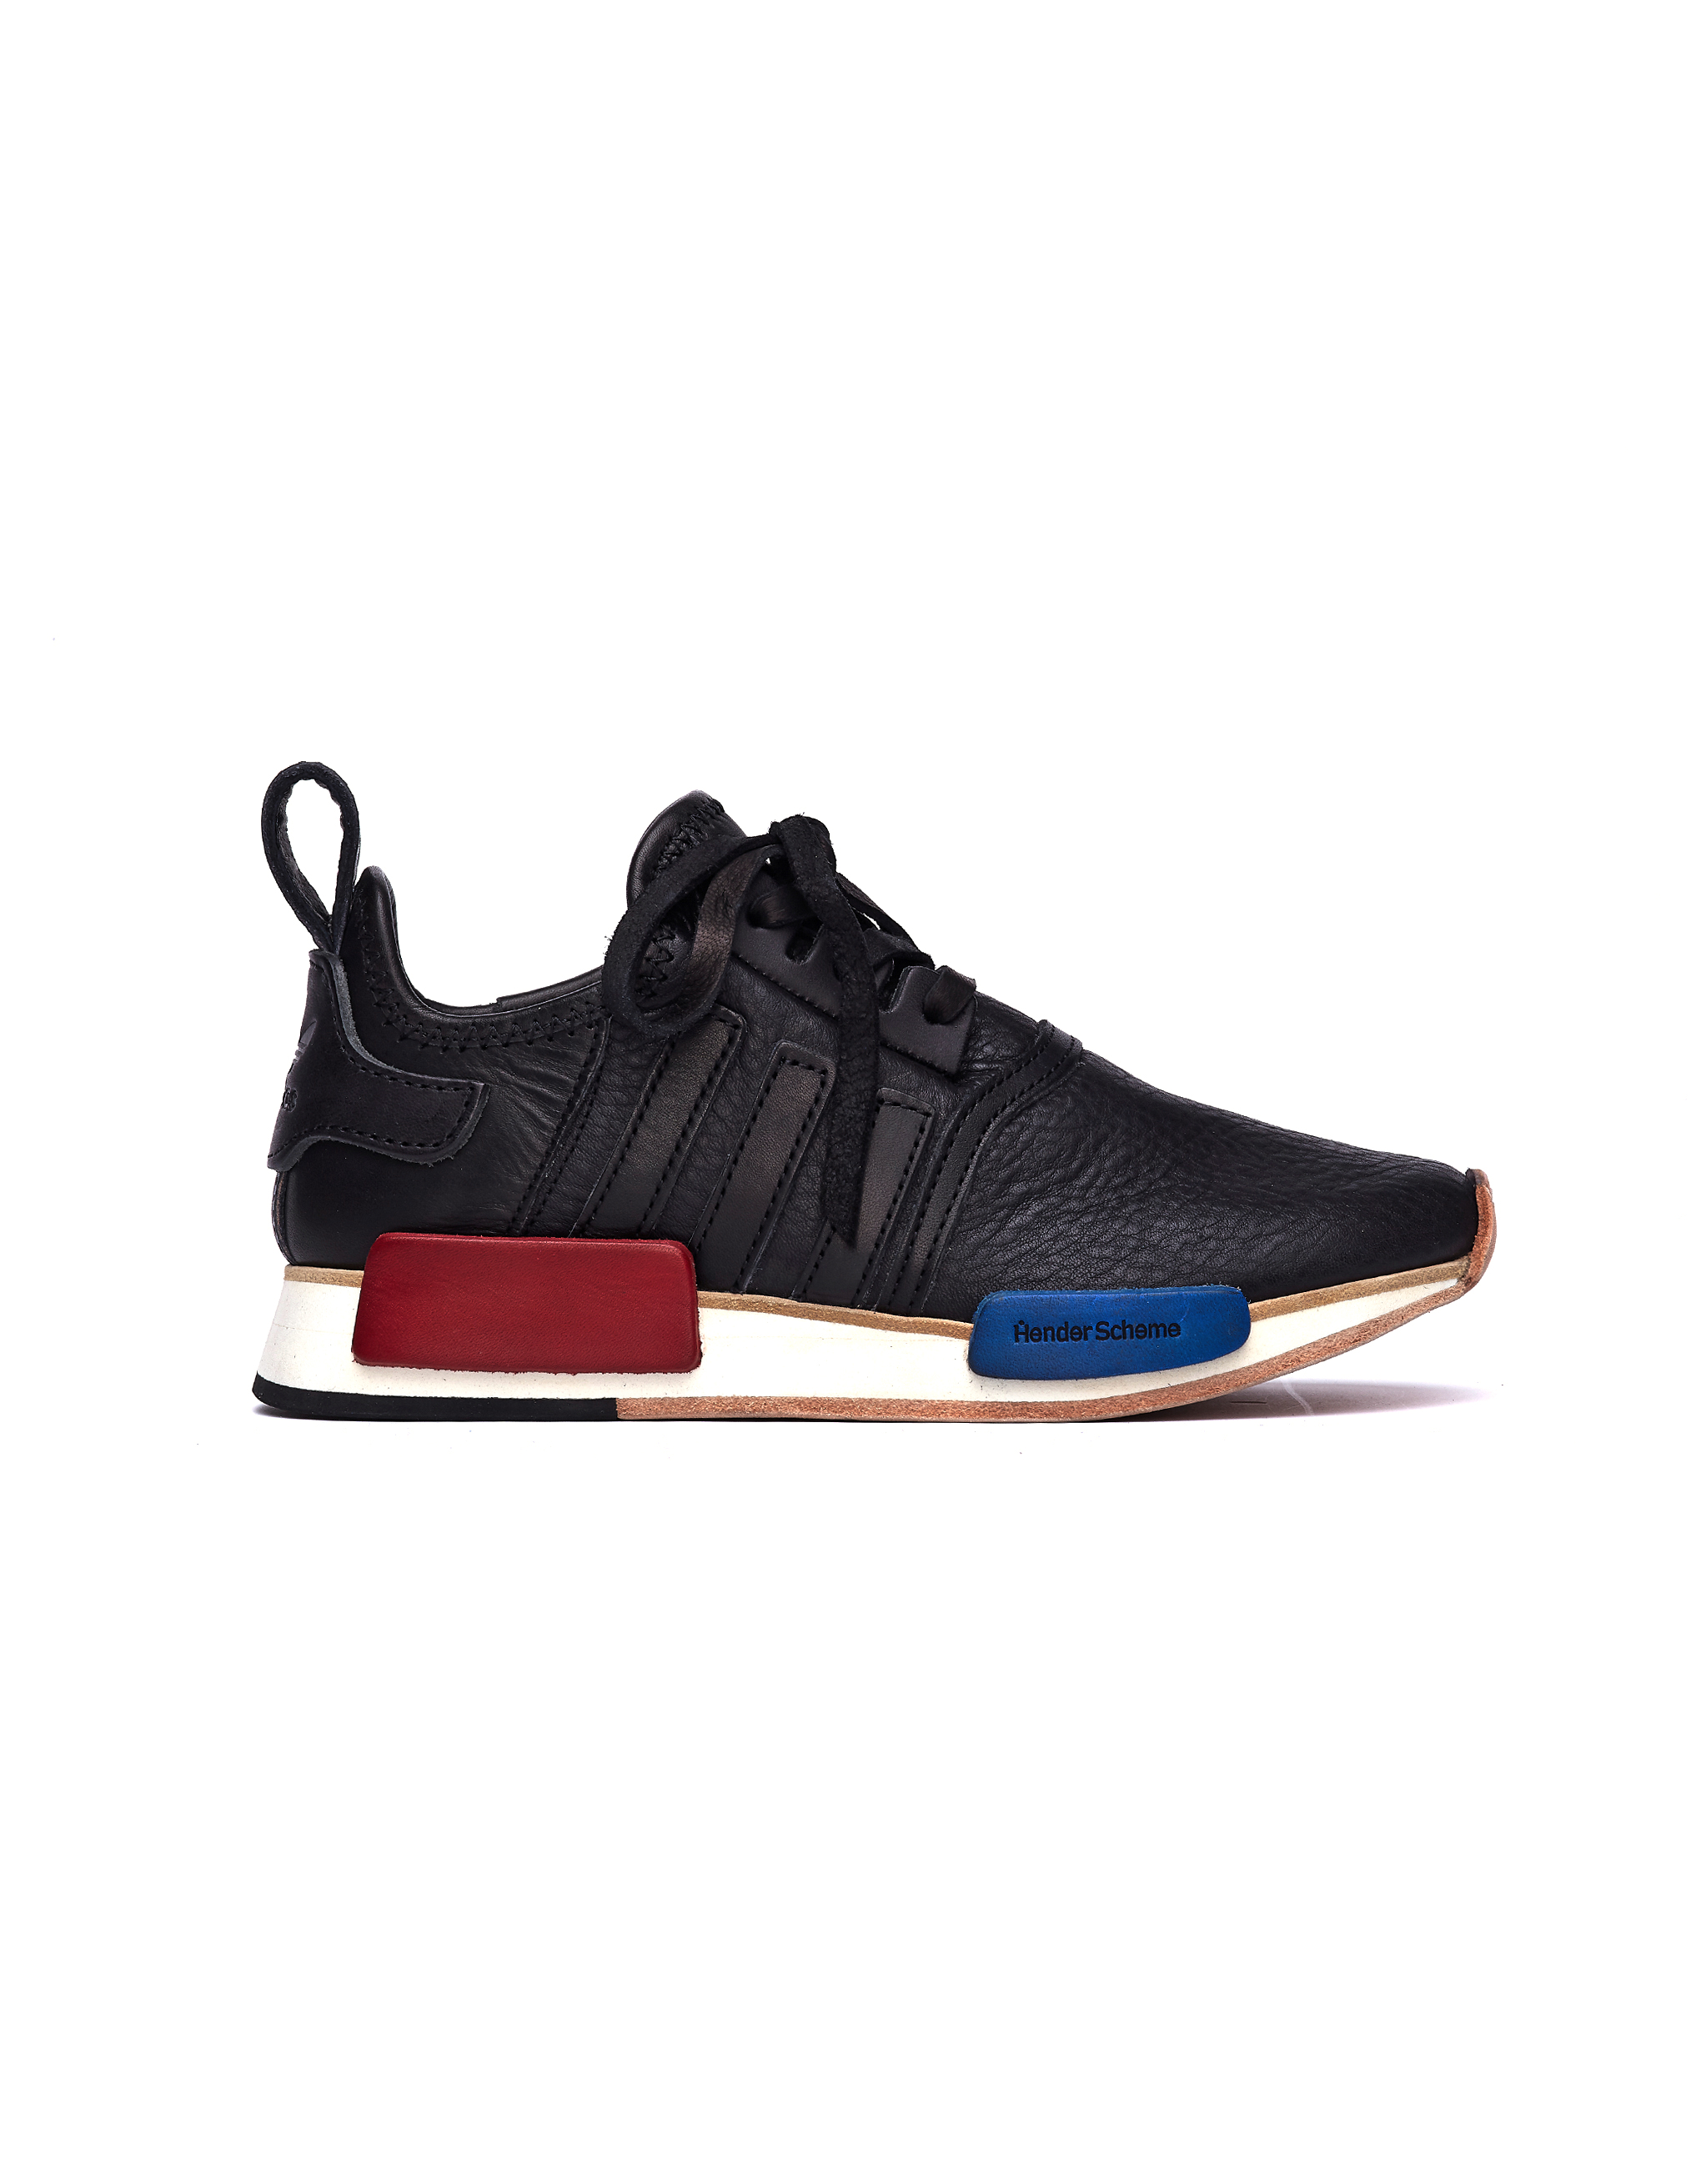 Hender Scheme | Adidas NMD R1 Black Leather Sneakers | SVMOSCOW.COM